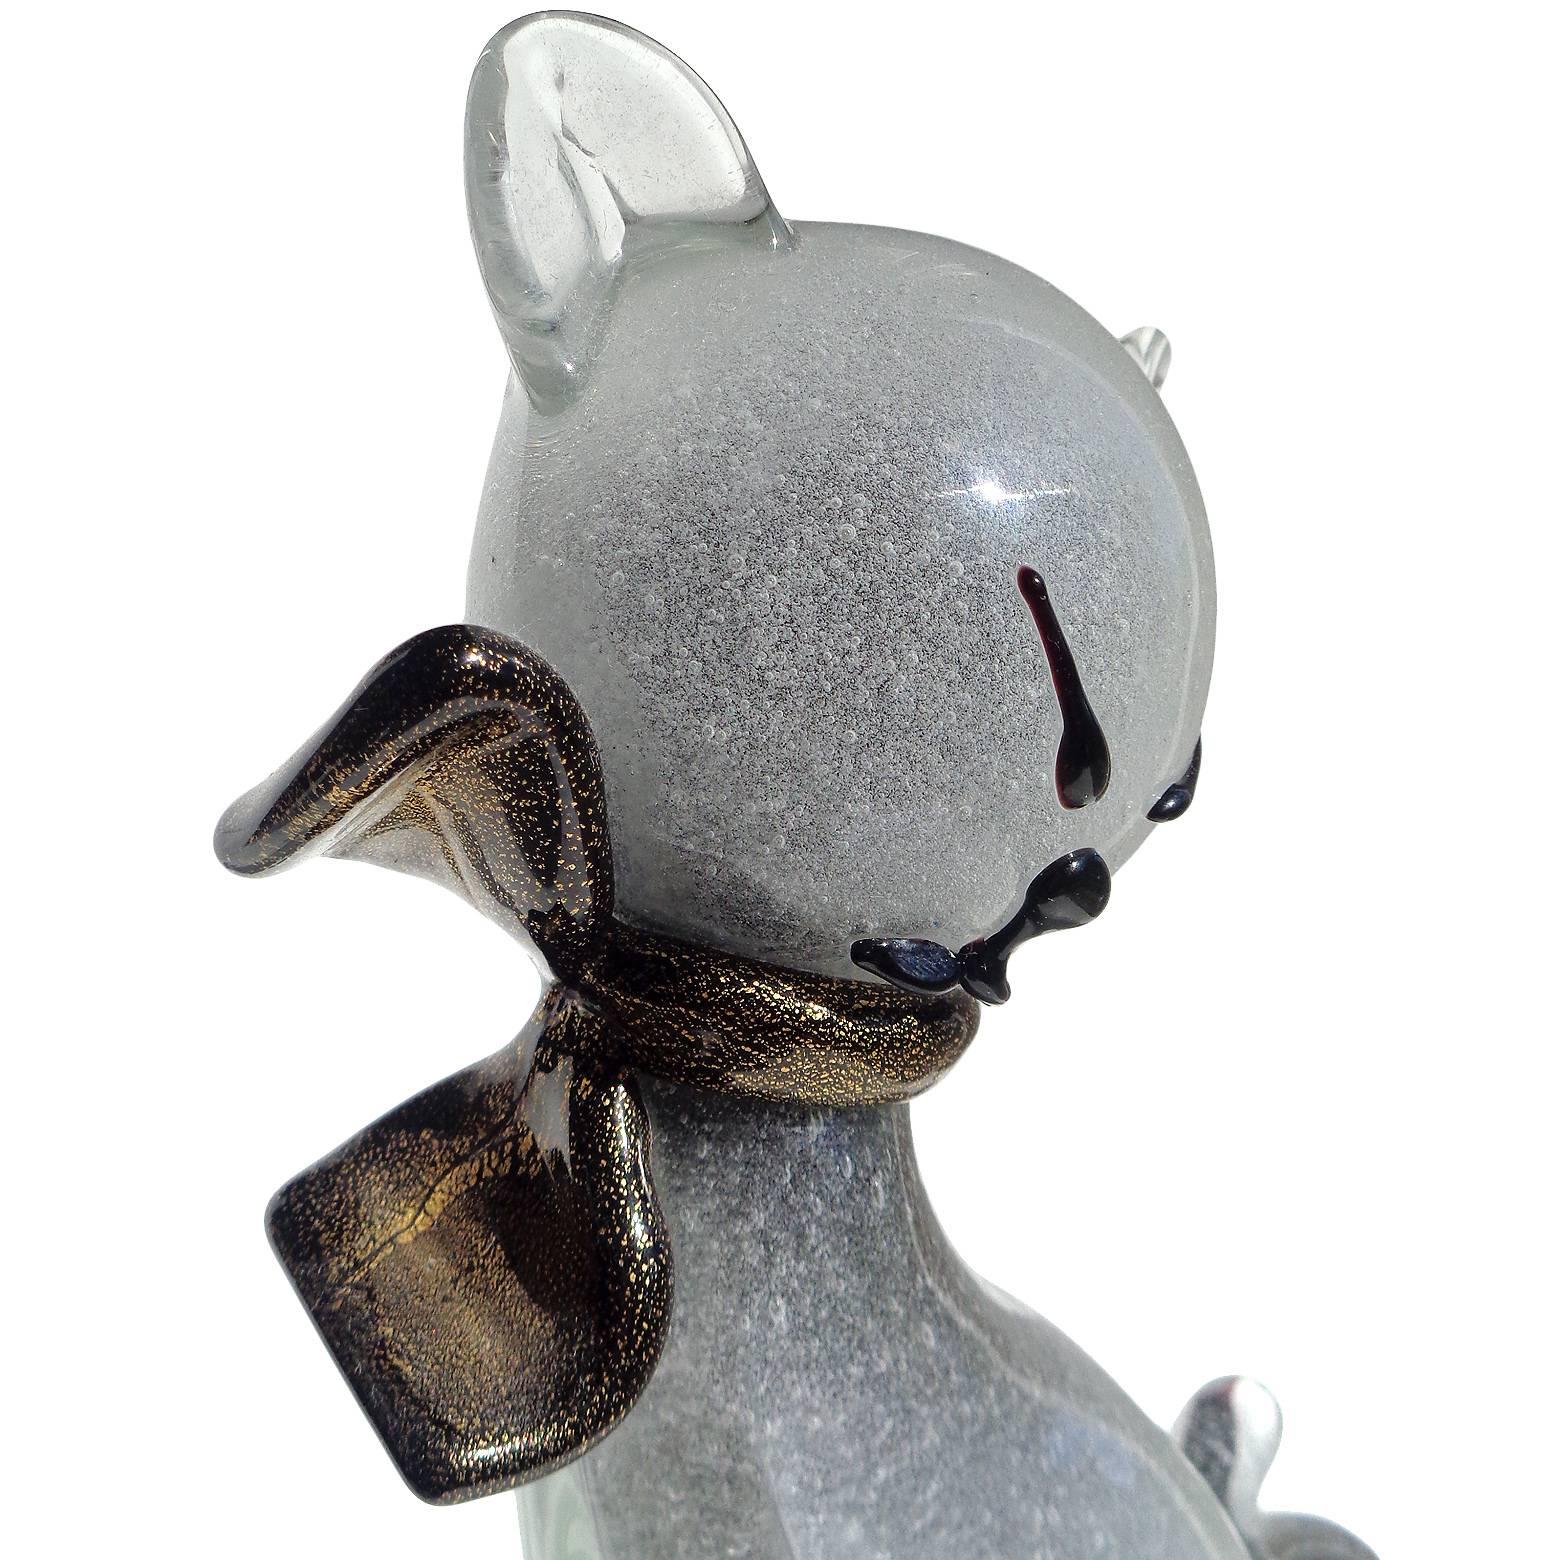 Gorgeous Murano hand blown Pulegoso tiny bubbles over black core and gold flecks Italian art glass cat figurine or sculpture with bow. Documented to designer Alfredo Barbini, circa 1950s. It is published in his catalog. The kitten has a very elegant